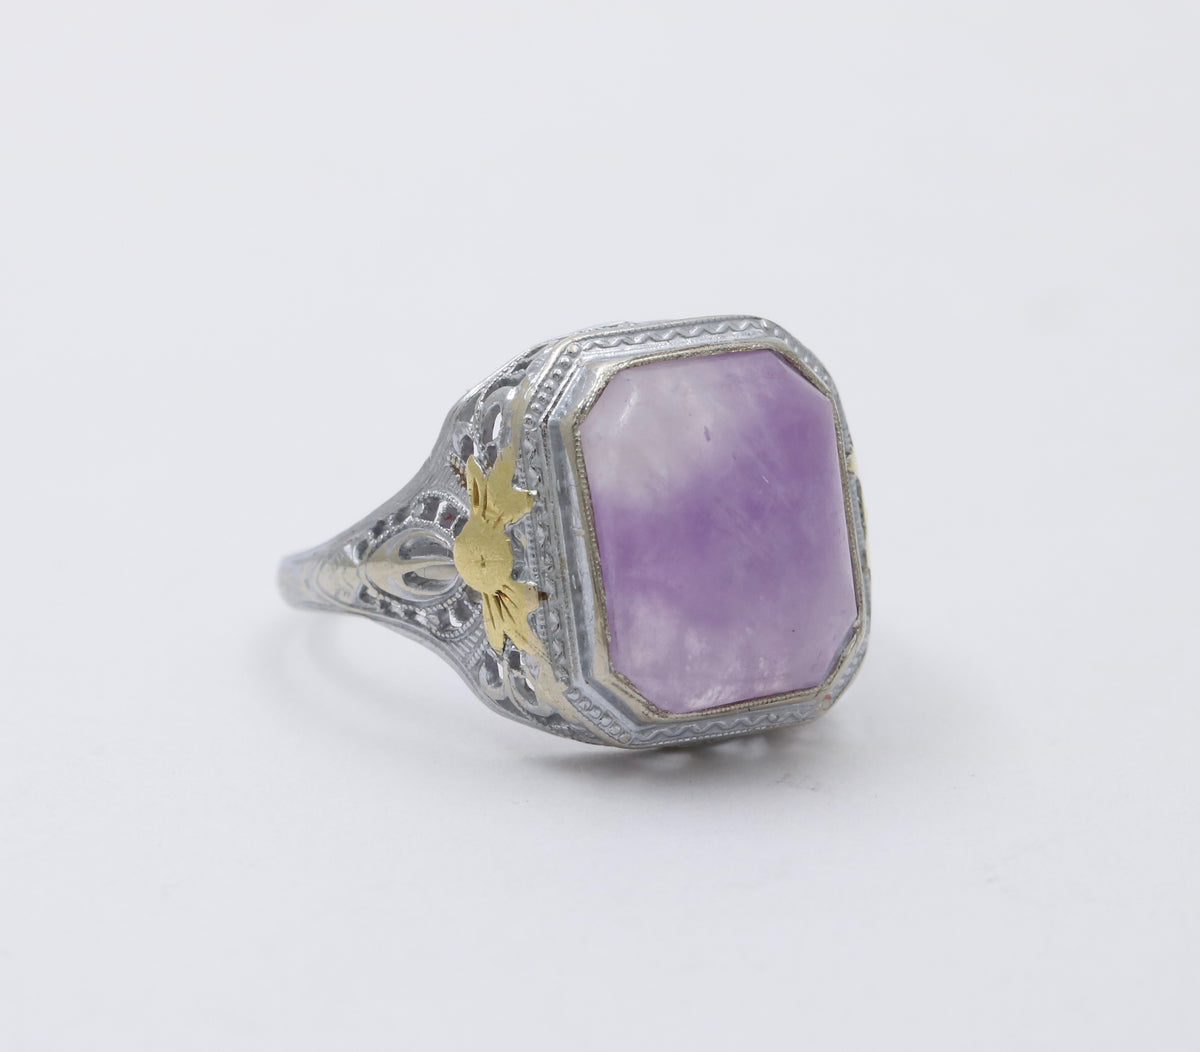 Art Deco Amethyst and 10K Gold Bow Motif and Filigree Ring, Antique Ring